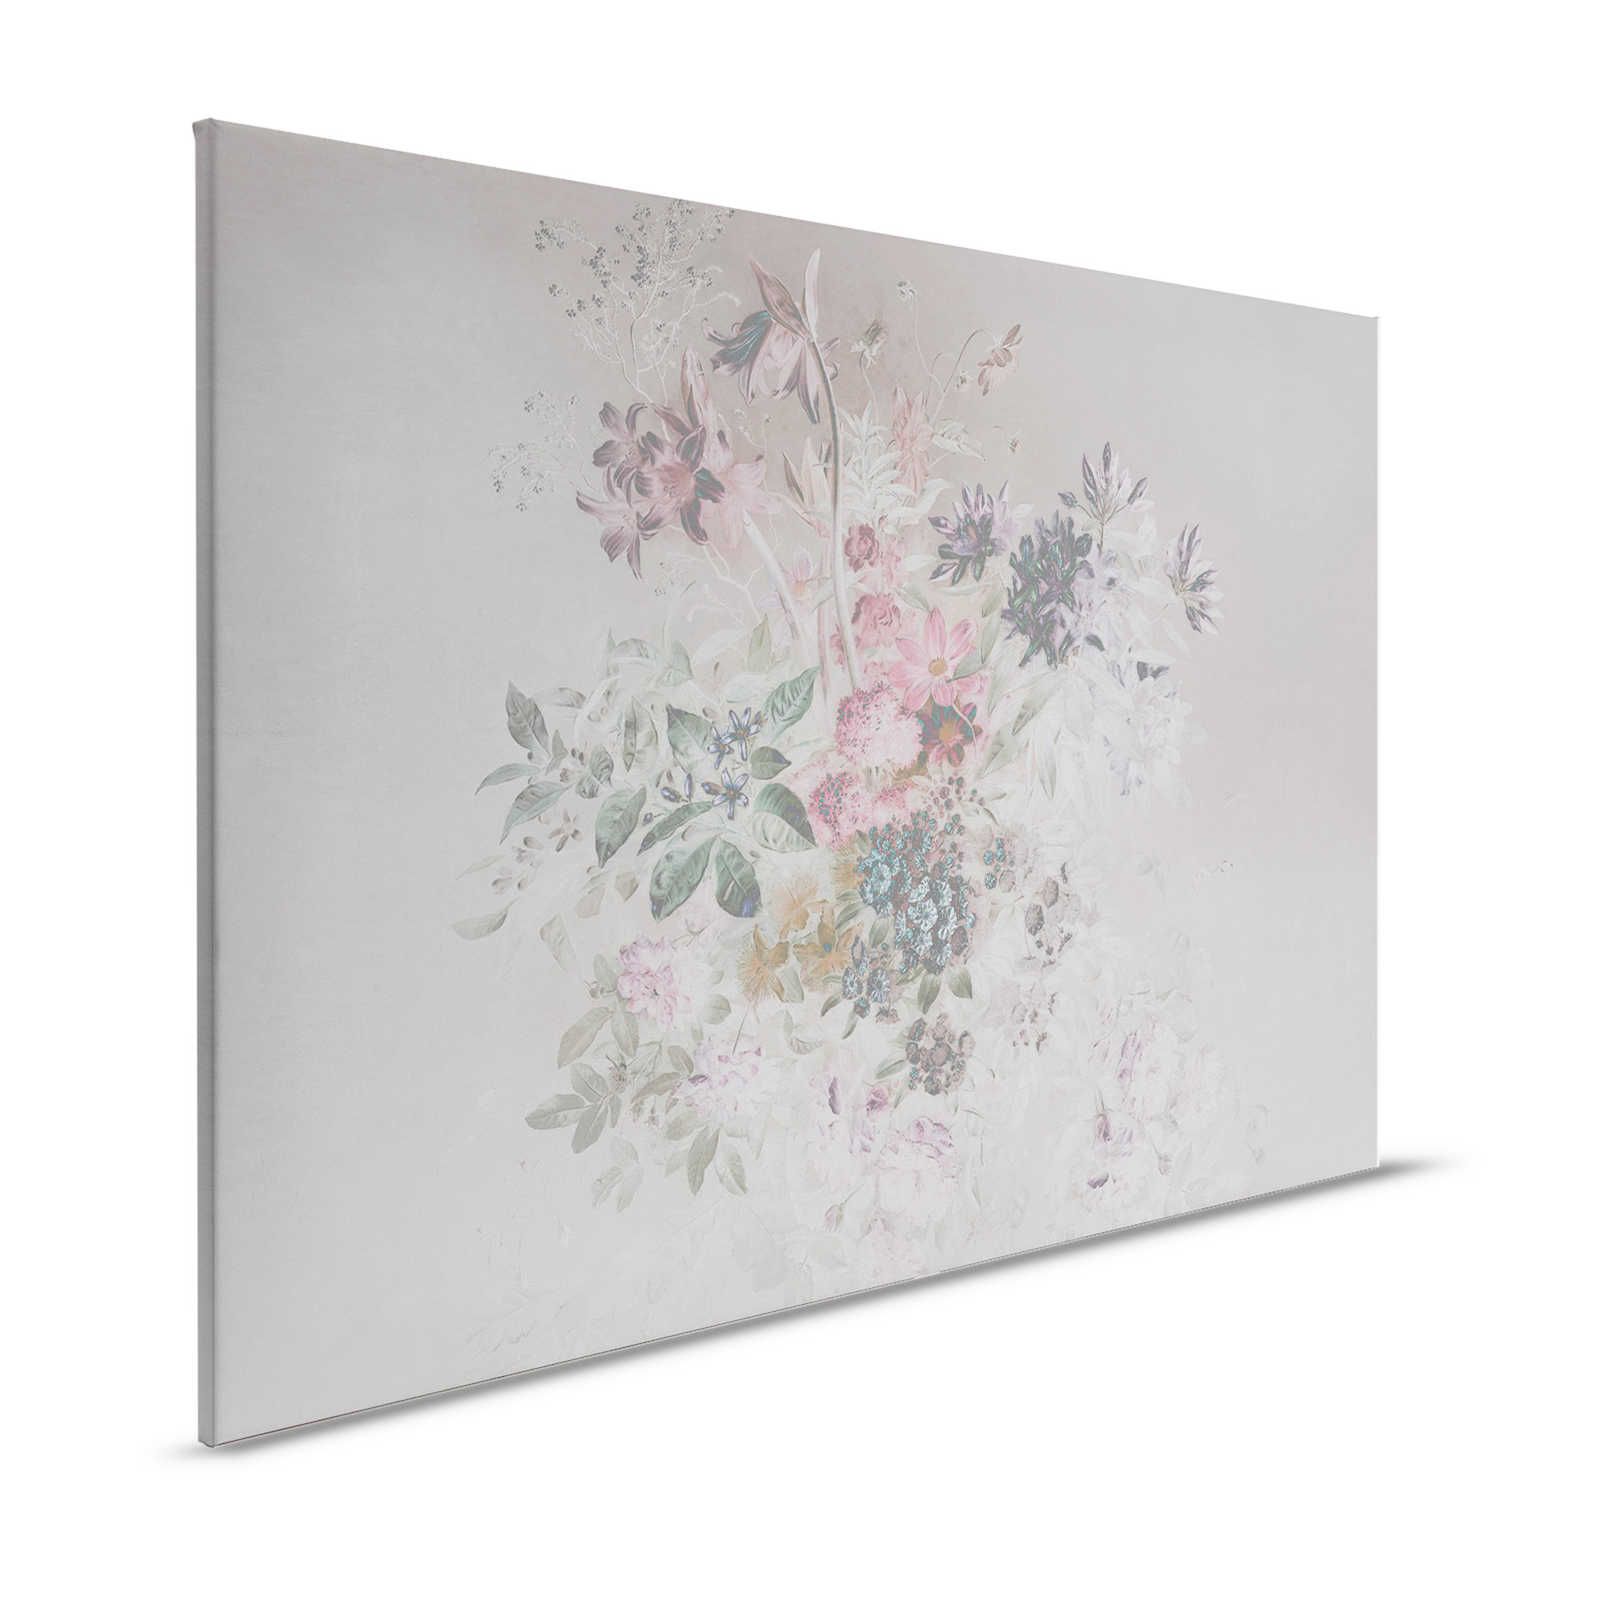 Flowers Canvas Painting with Pastel Design - 0.90 m x 0.60 m
